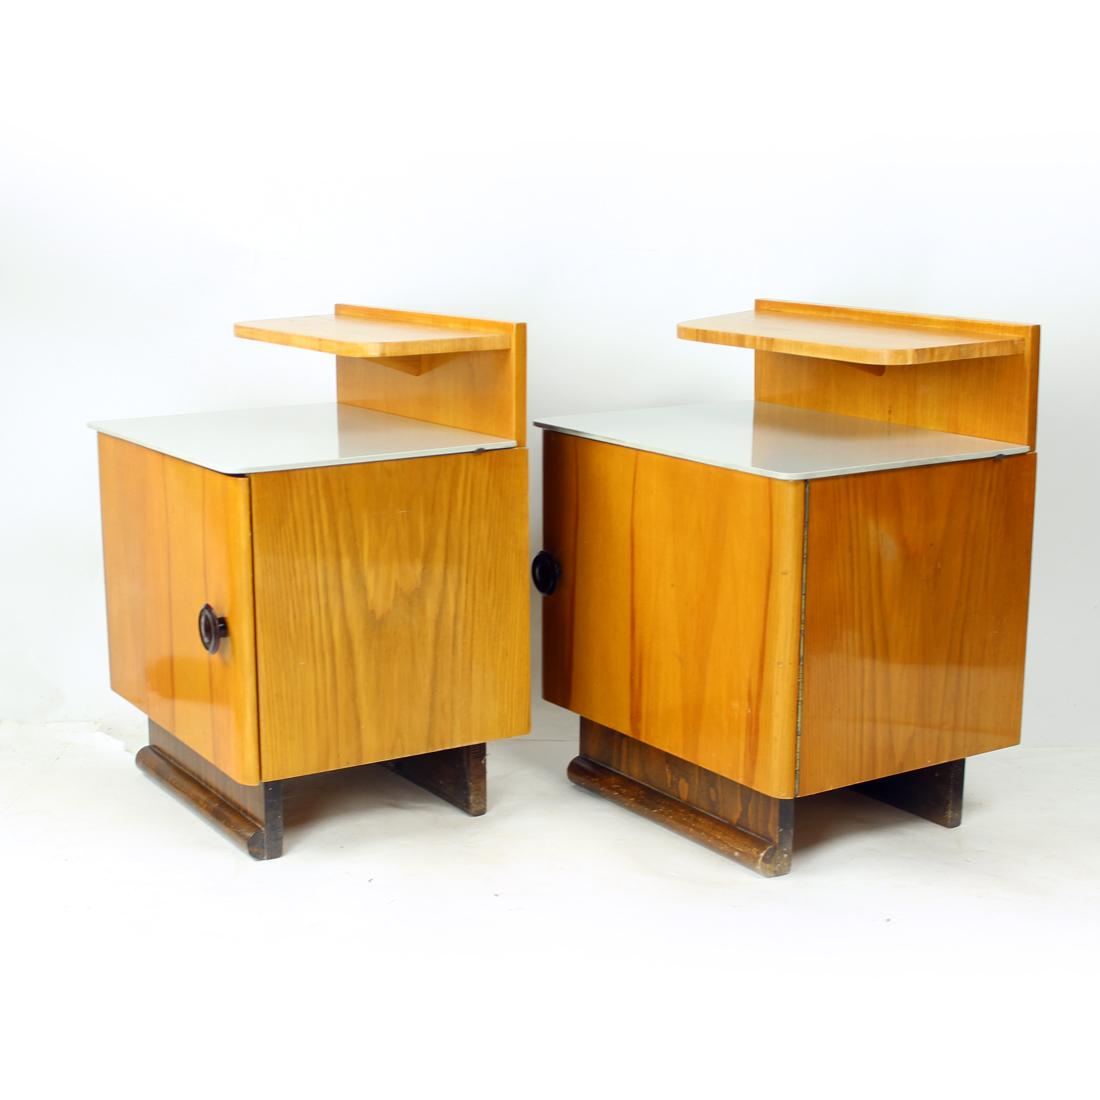 Set Of Two Bedside Tables In Wood & Glass, Czechoslovakia 1950s For Sale 3